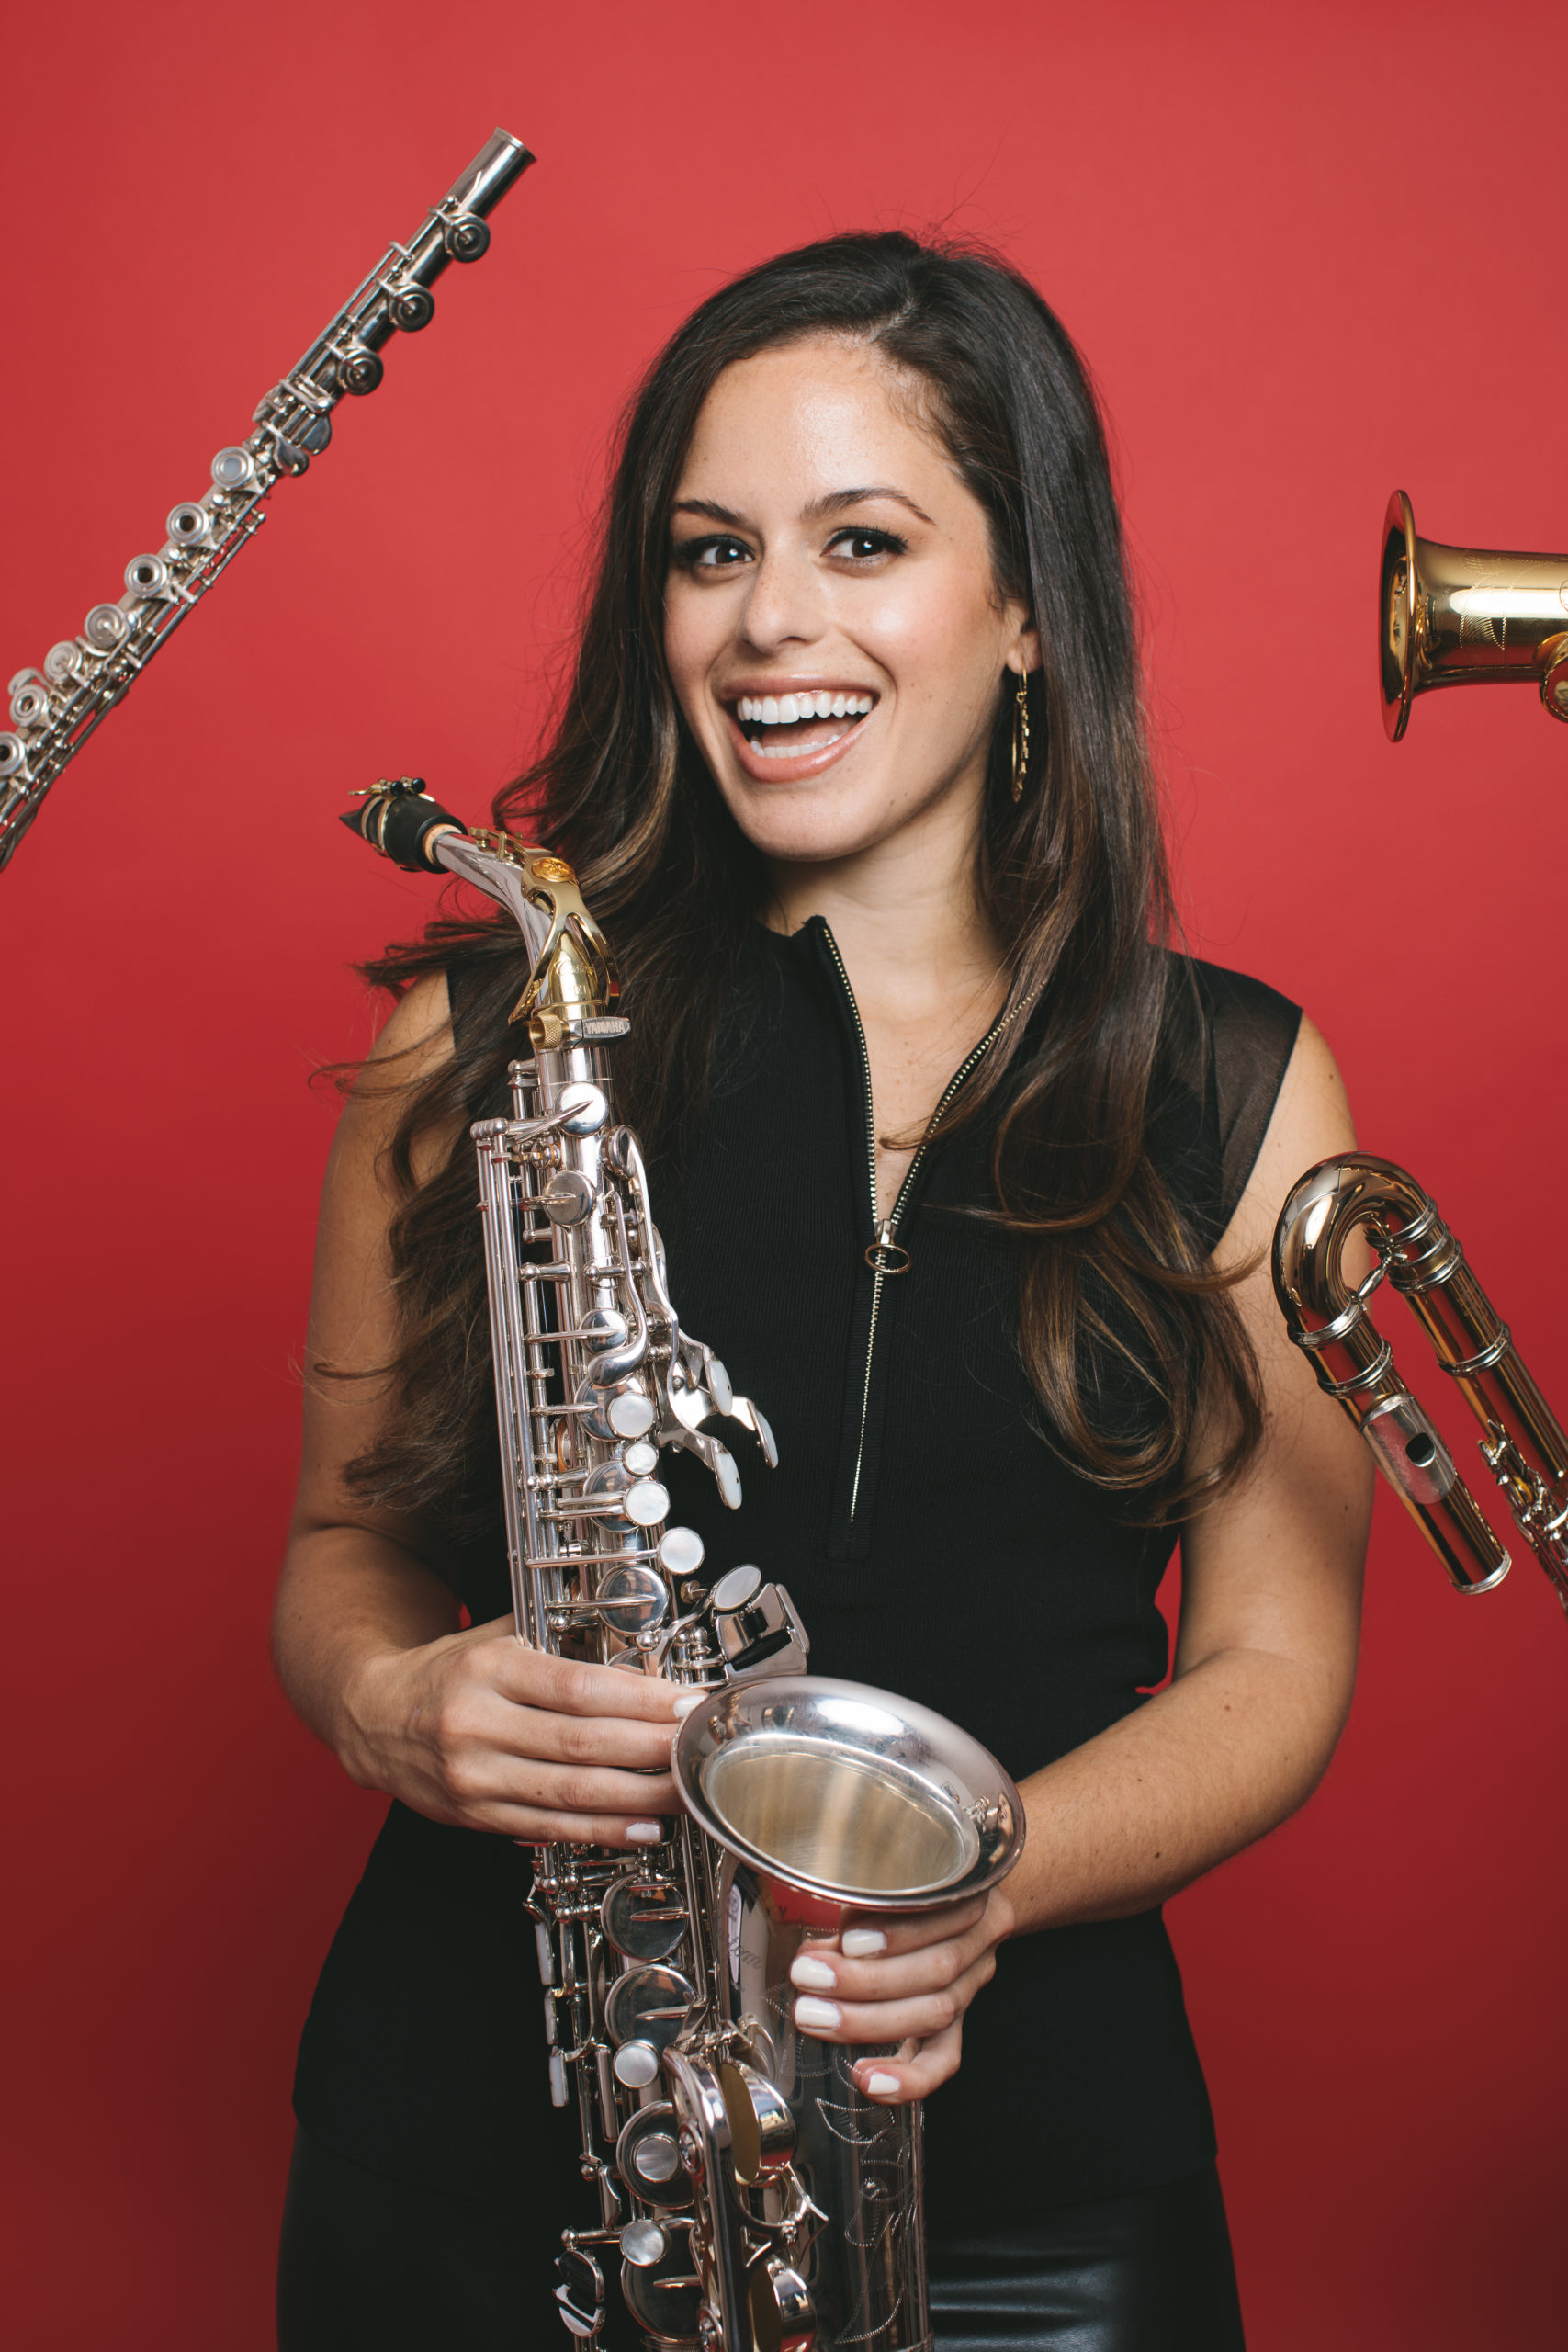 Alexa Tarantino smiling with instruments pointing every which way